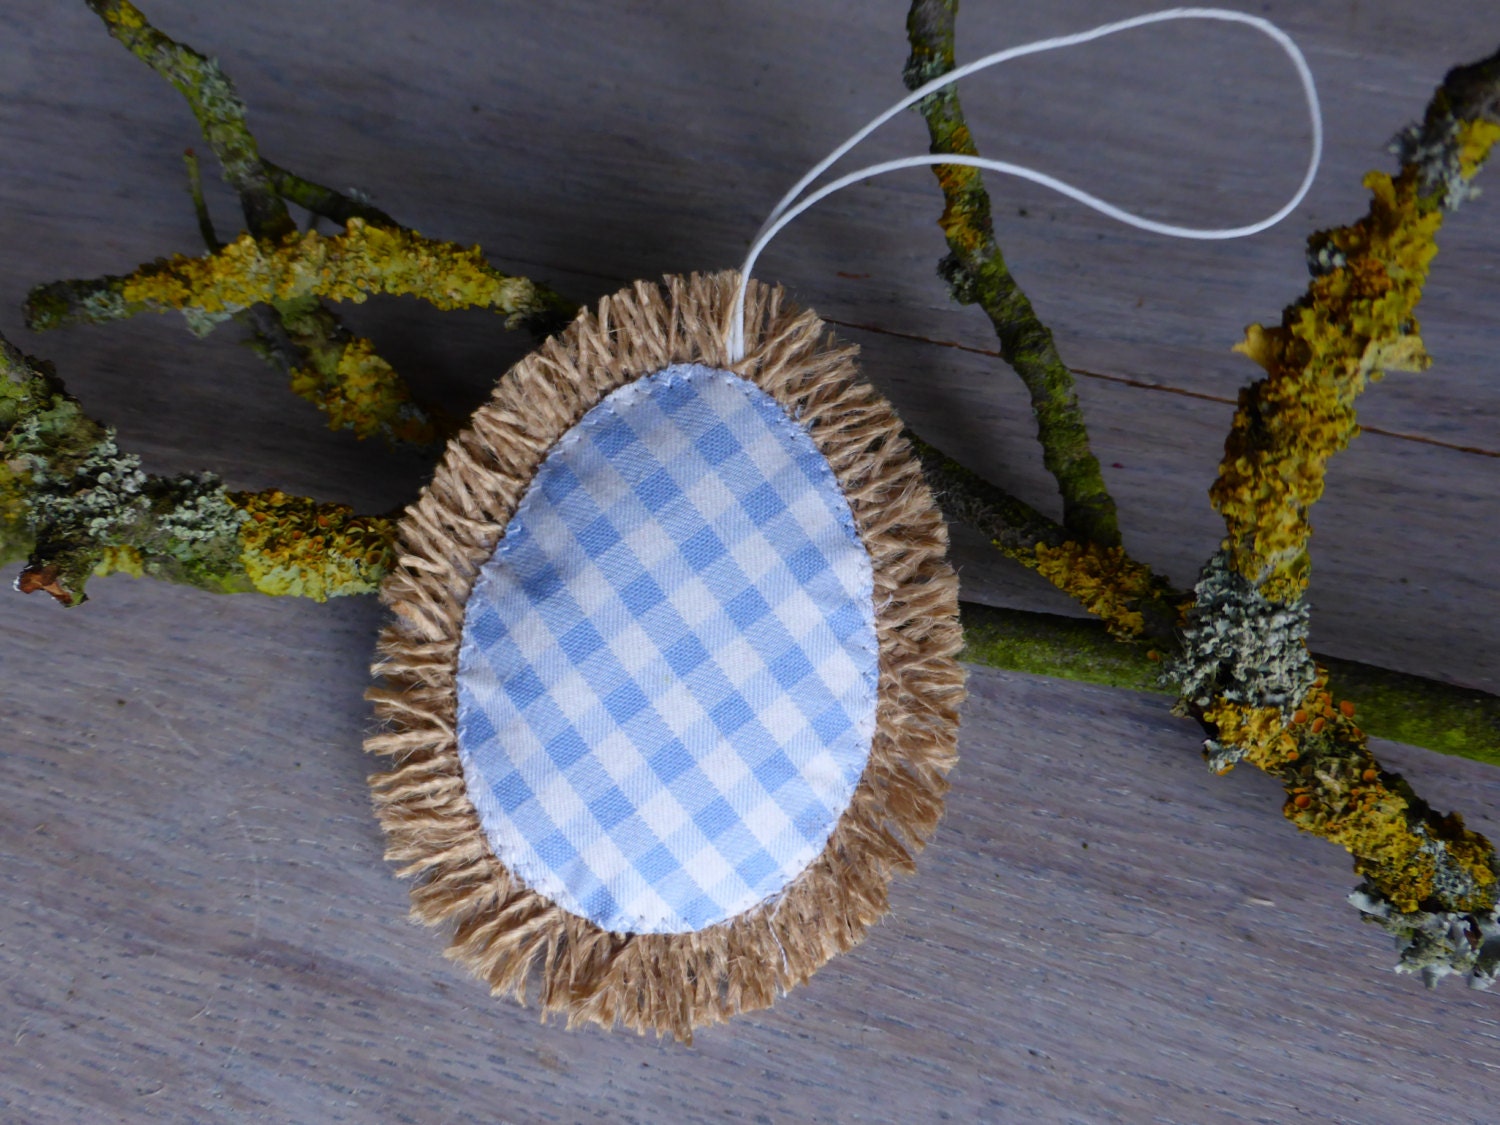 Rustic burlap egg decorated with cotton white light blue gingham - Home Decor -